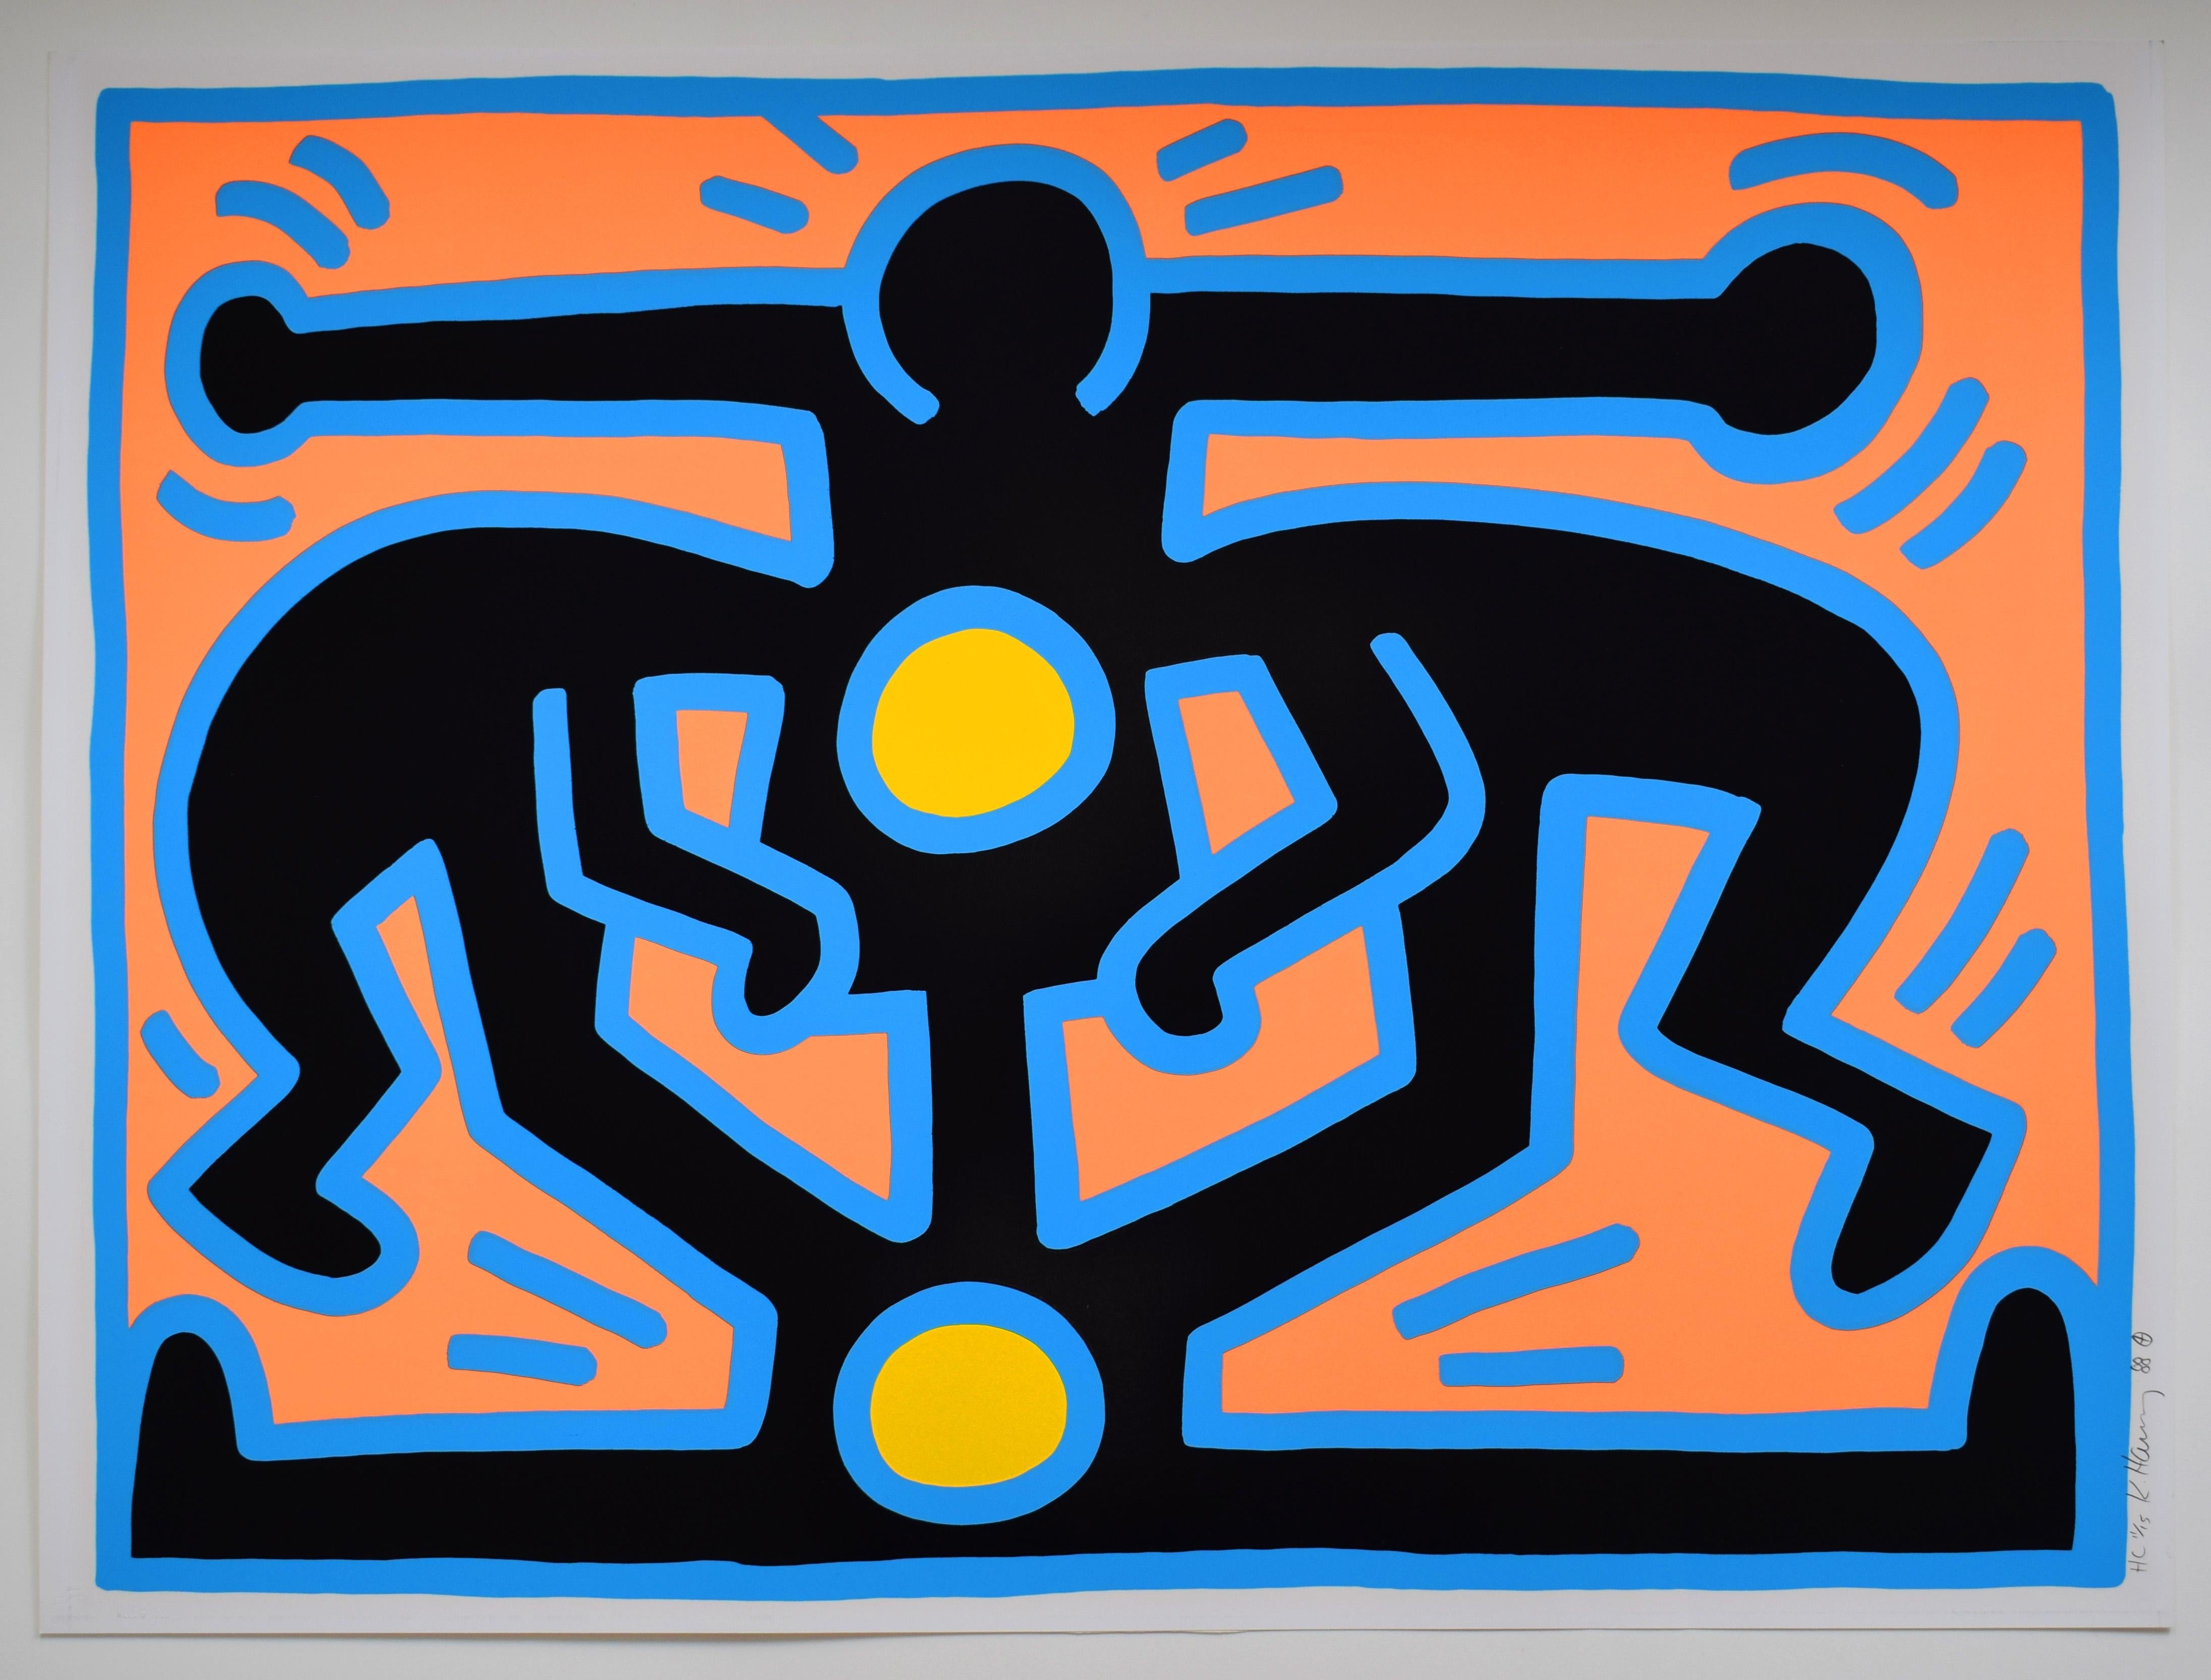 Untitled, from: Growing - Pop Art American Vibrant Street Art - Print by Keith Haring